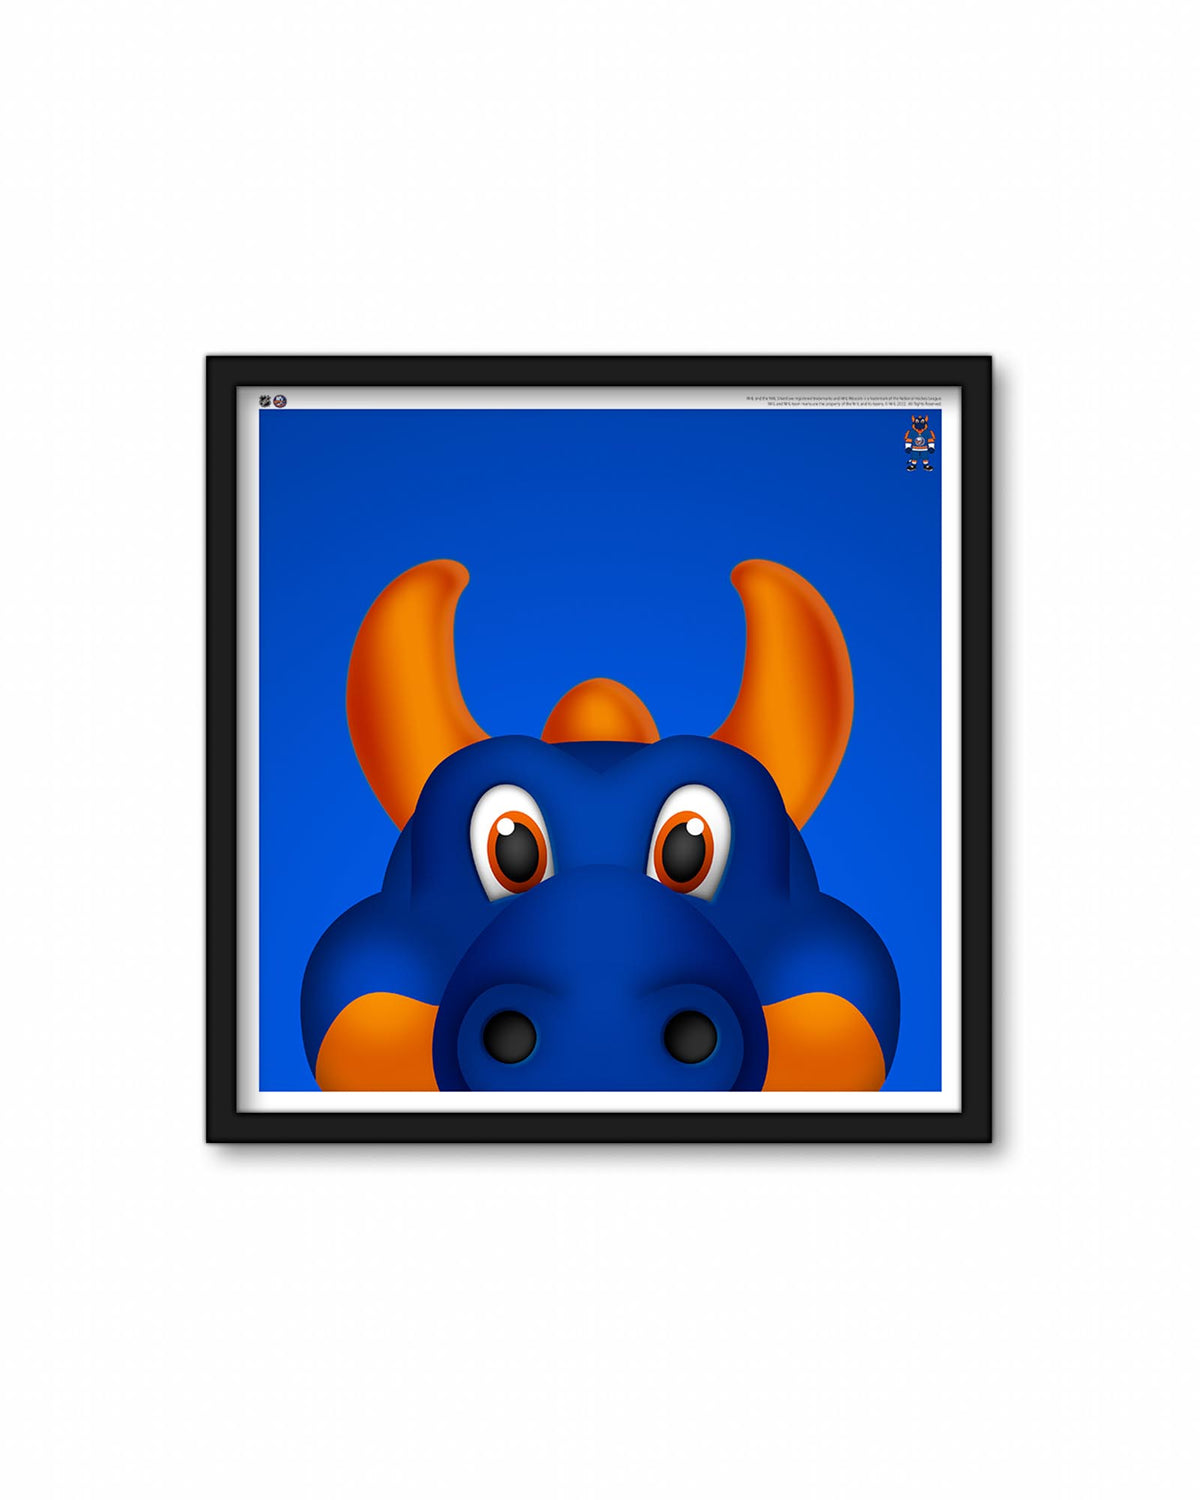 Minimalist Sparky the Dragon Square Poster Print